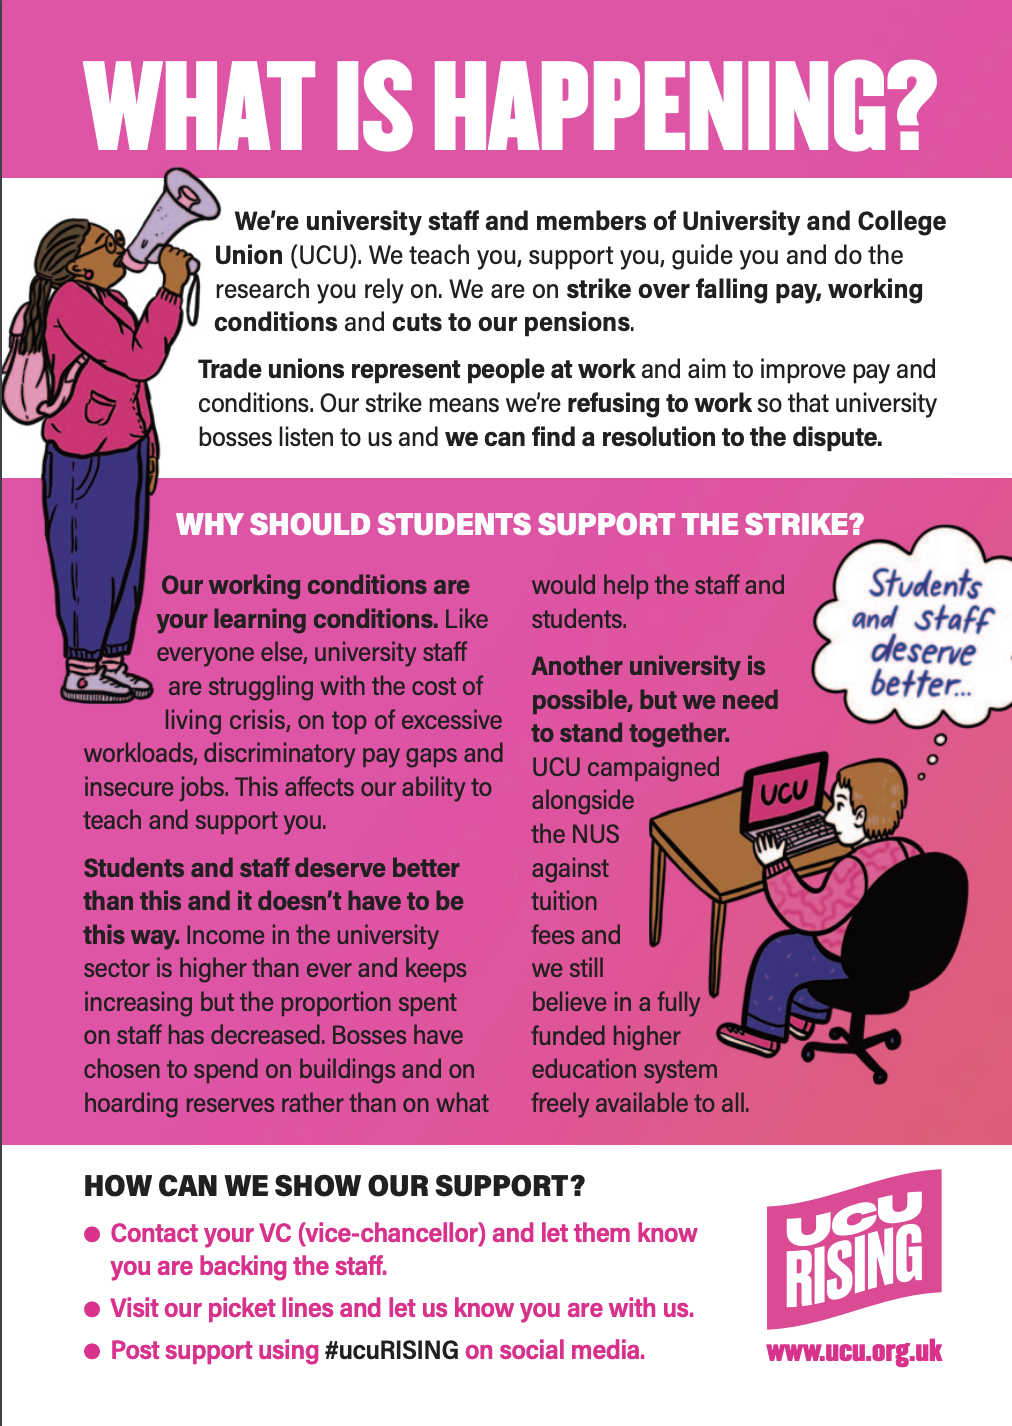 What can students do